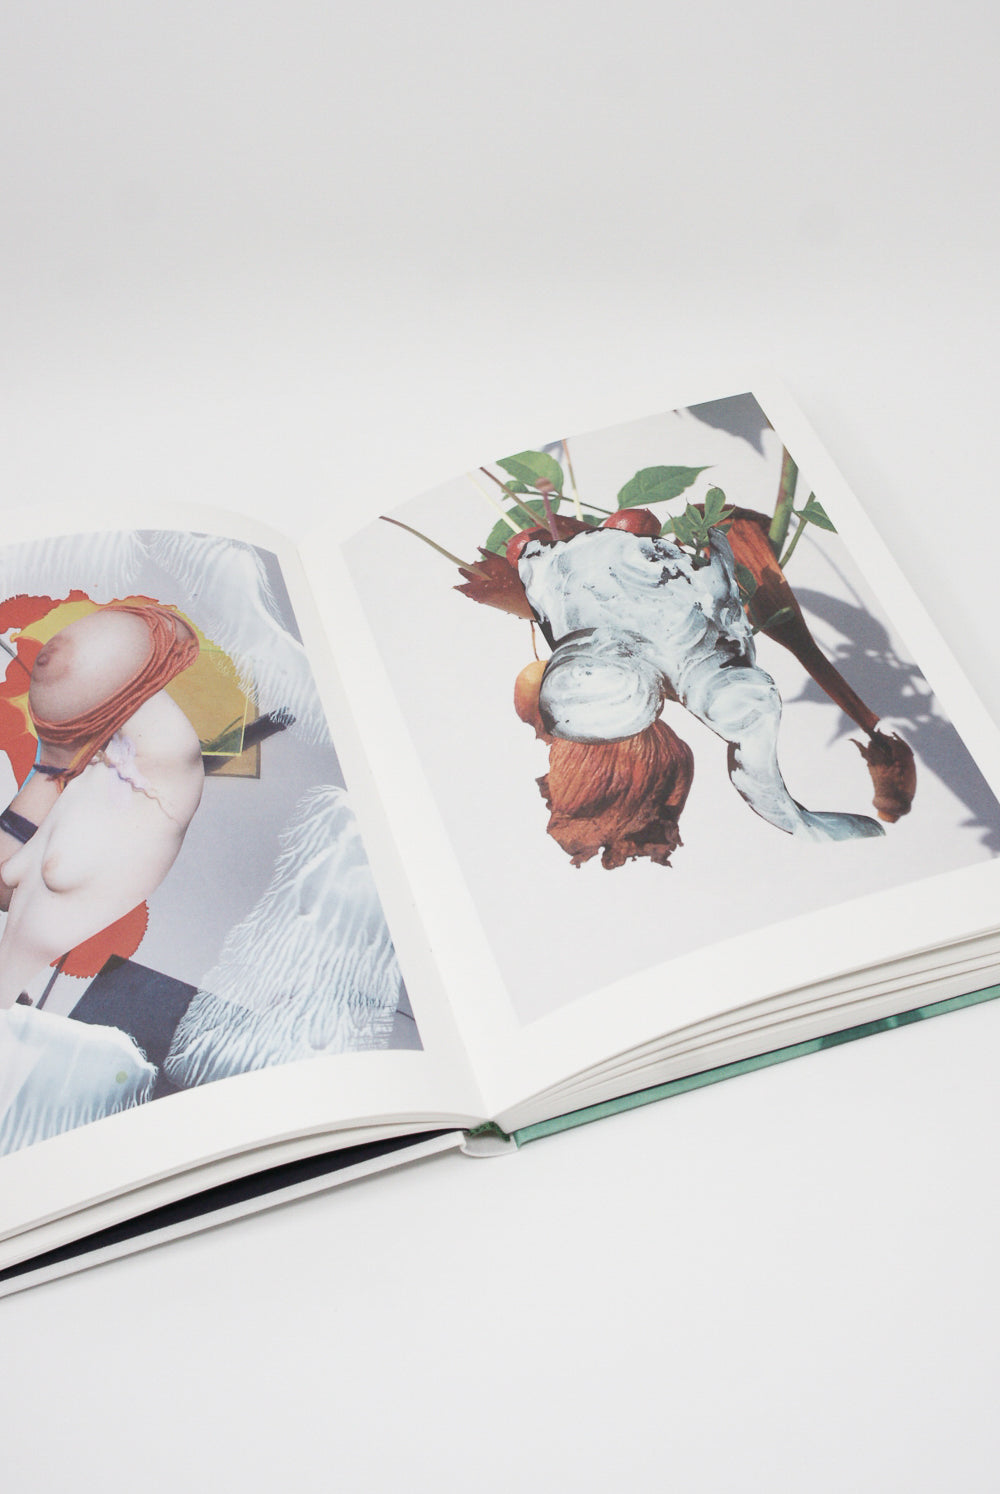 A Viviane Sassen & Emanuele Coccia: Modern Alchemy photobook capturing the essence of a woman and a man through stunning photographs, brought to you by Artbook/D.A.P.